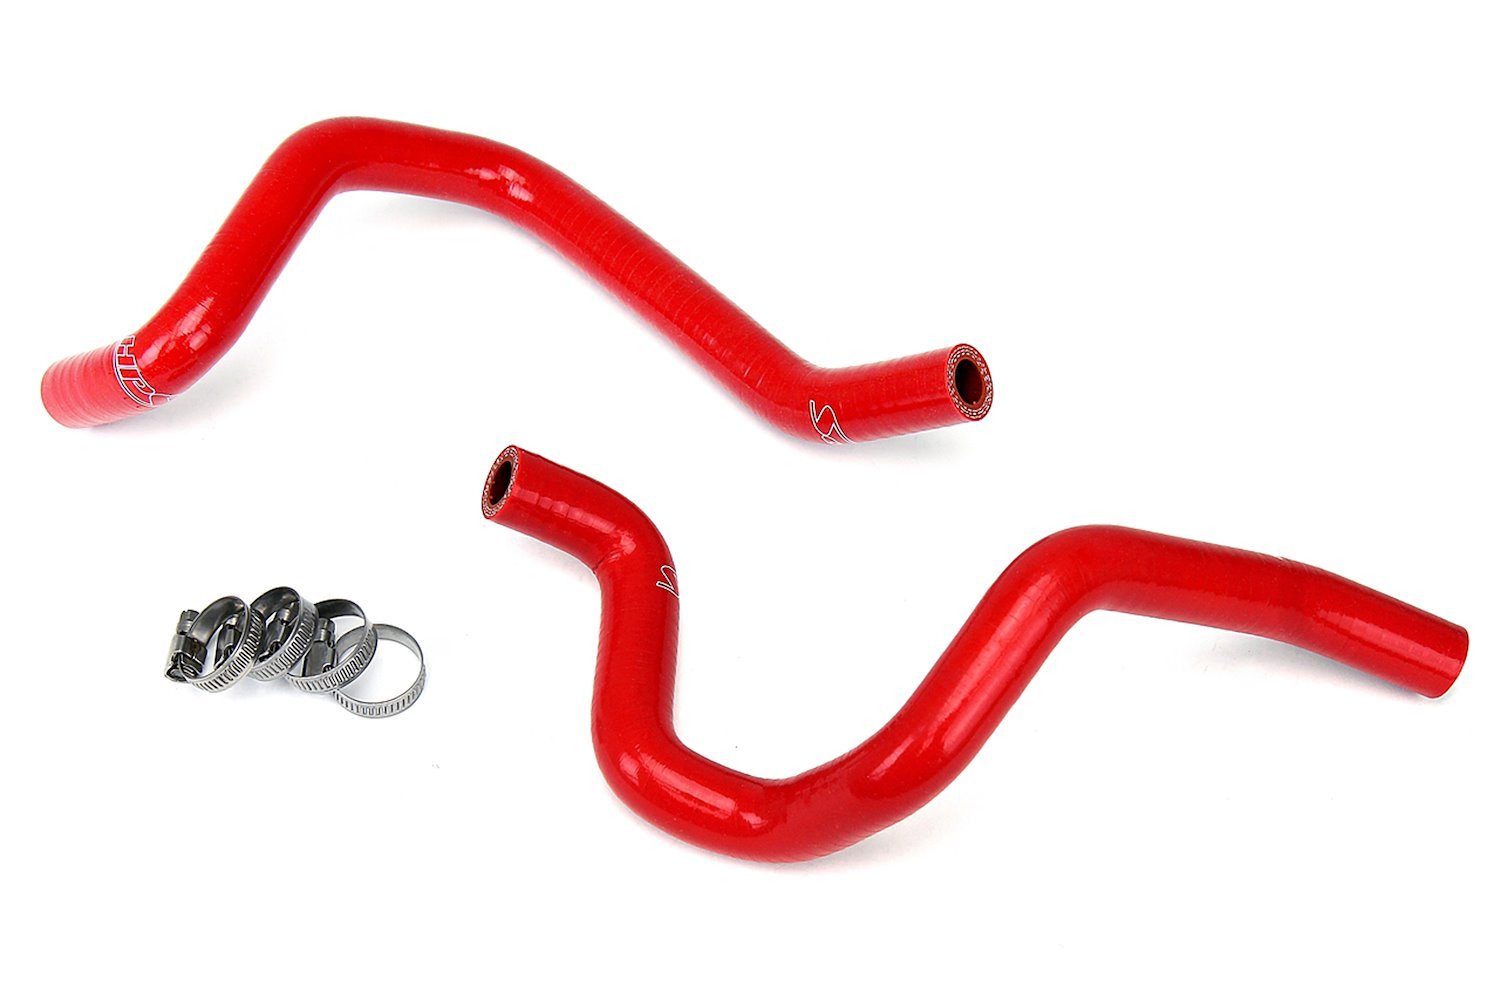 57-1804-RED Heater Hose Kit, 3-Ply Reinforced Silicone, Replace OEM Rubber Heater Coolant Hoses